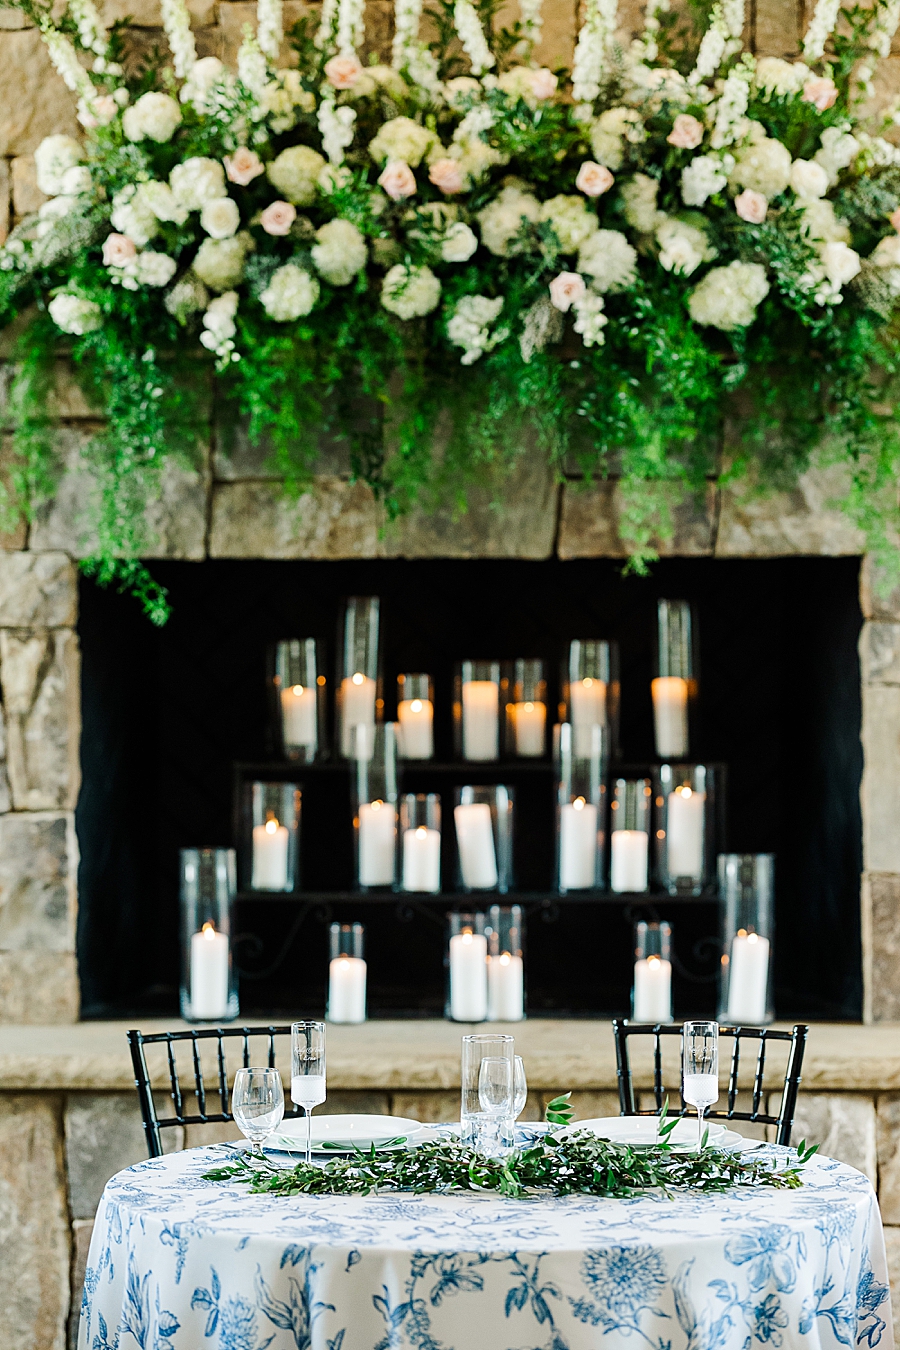 Bride and groom's reception table at Marblegate Wedding by Amanda May Photos